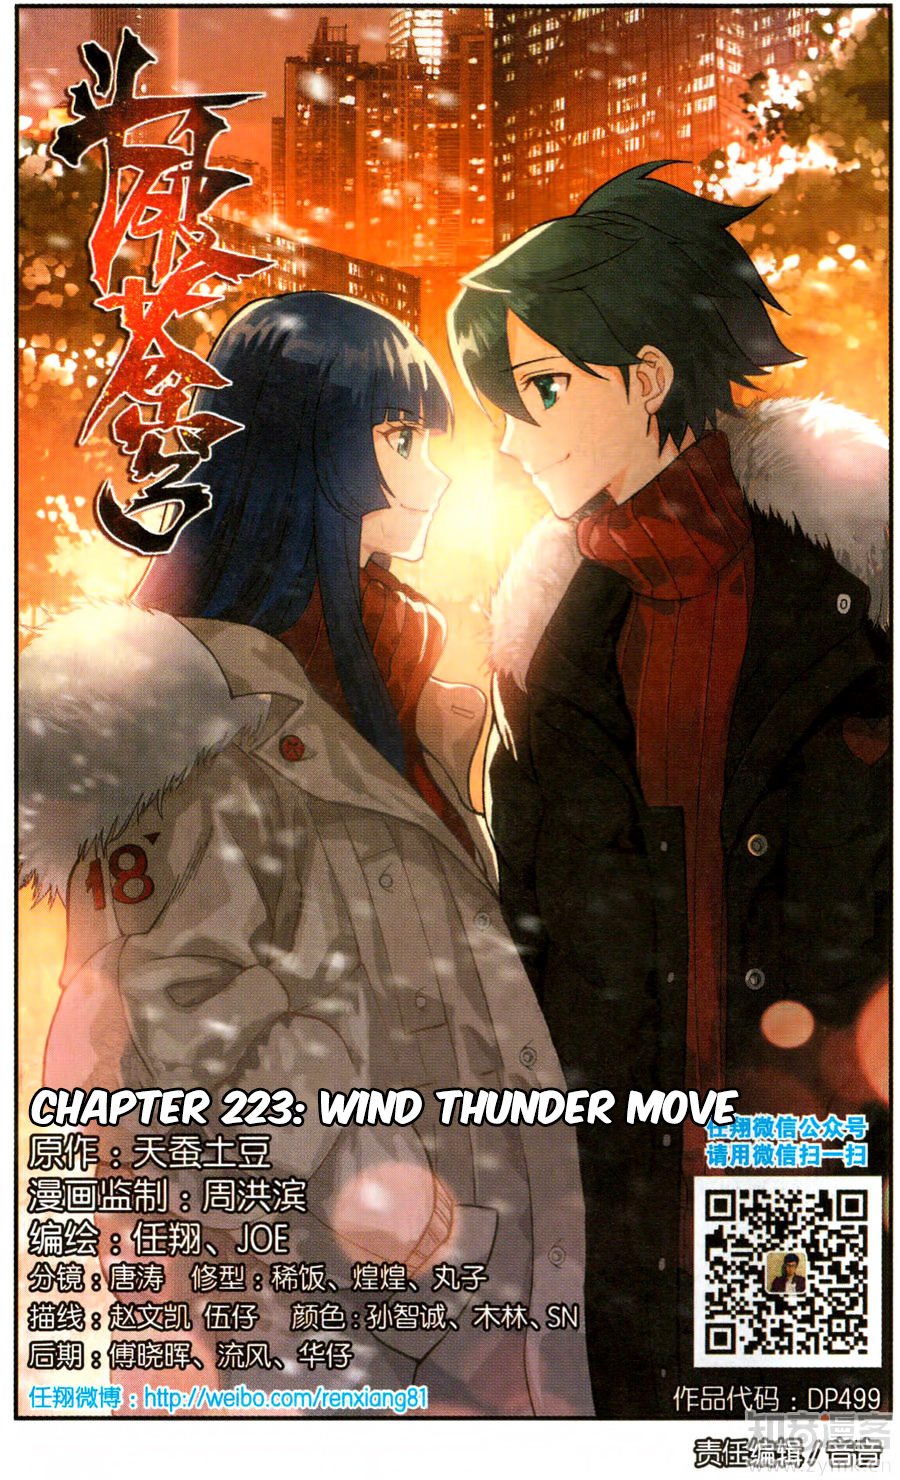 Fights Break Sphere Ch. 223 Wind Thunder Move